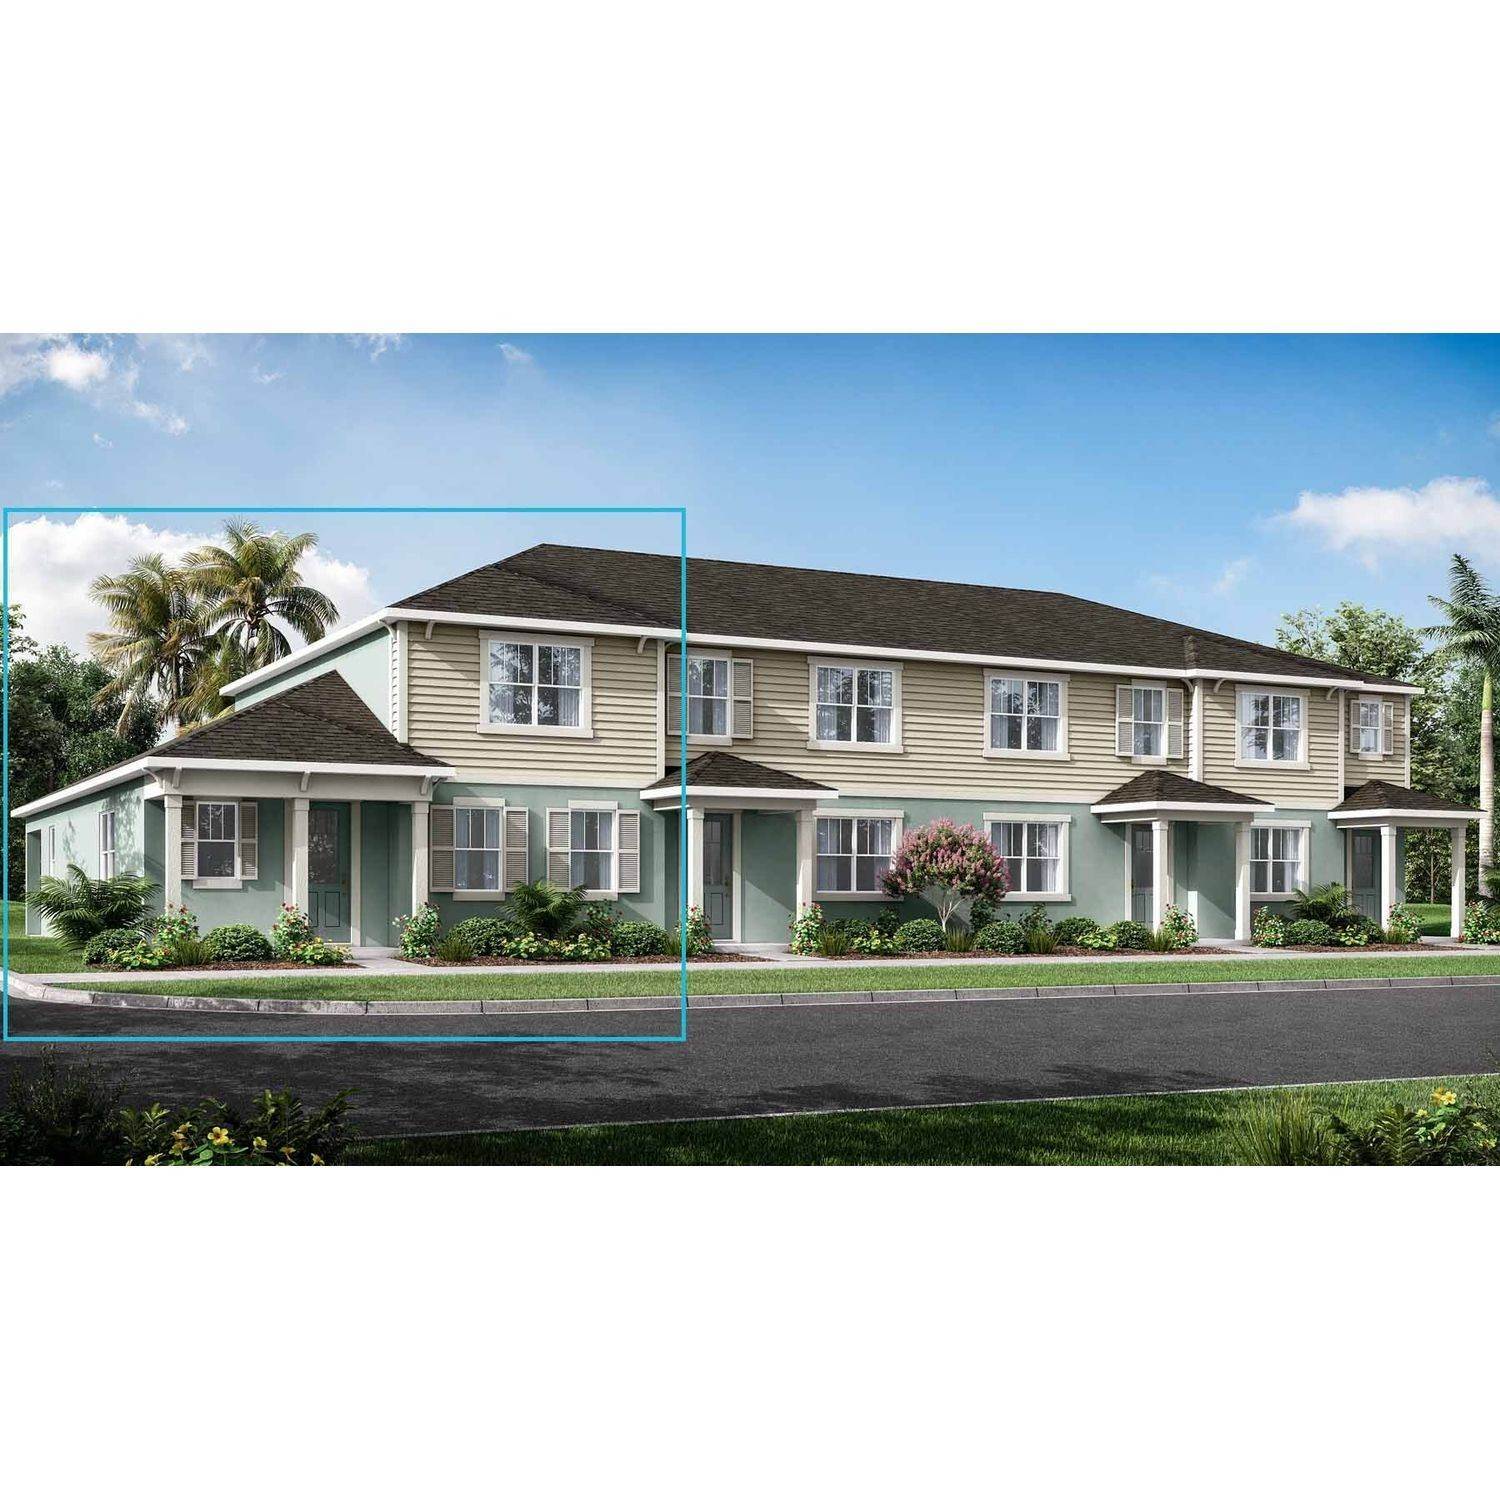 Multi Family for Sale at Clermont, FL 34711